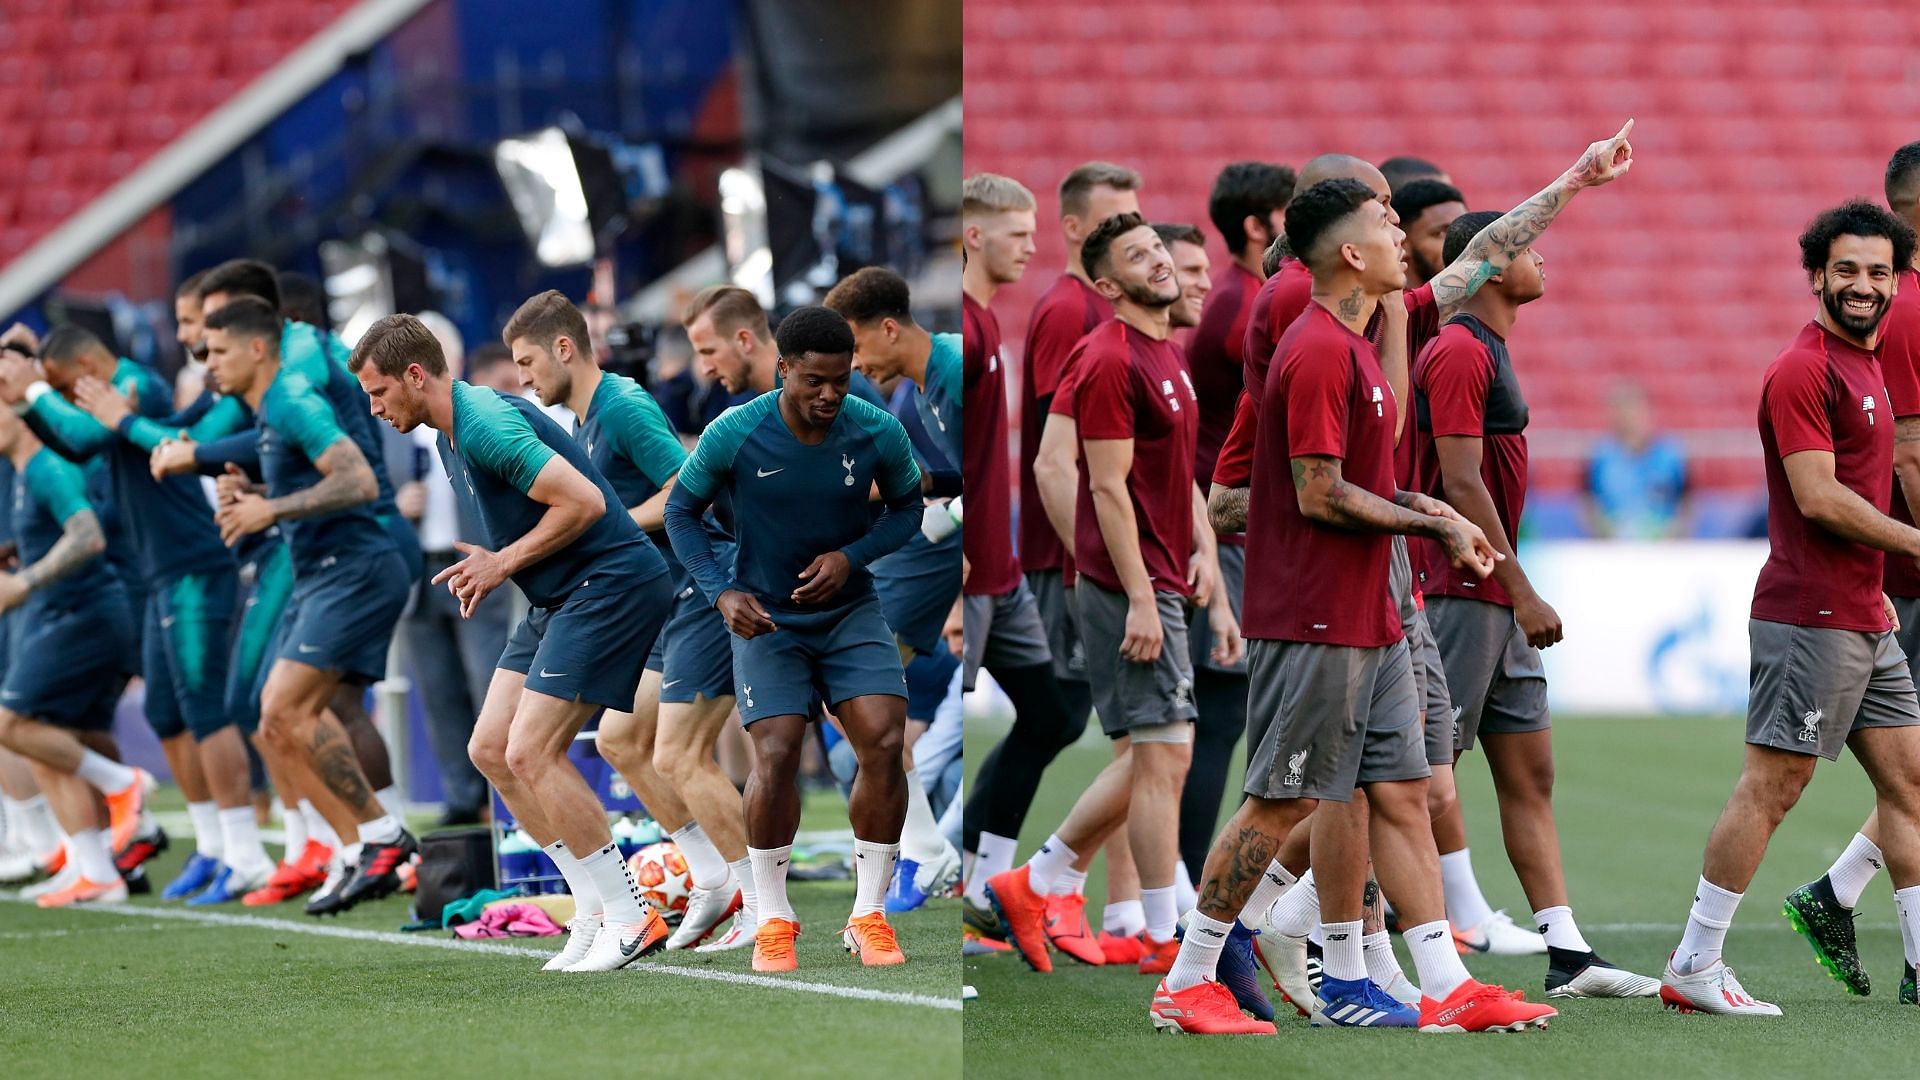 Both the sides warm-up ahead of the big final at the Wanda Metropolitano Stadium in Madrid.